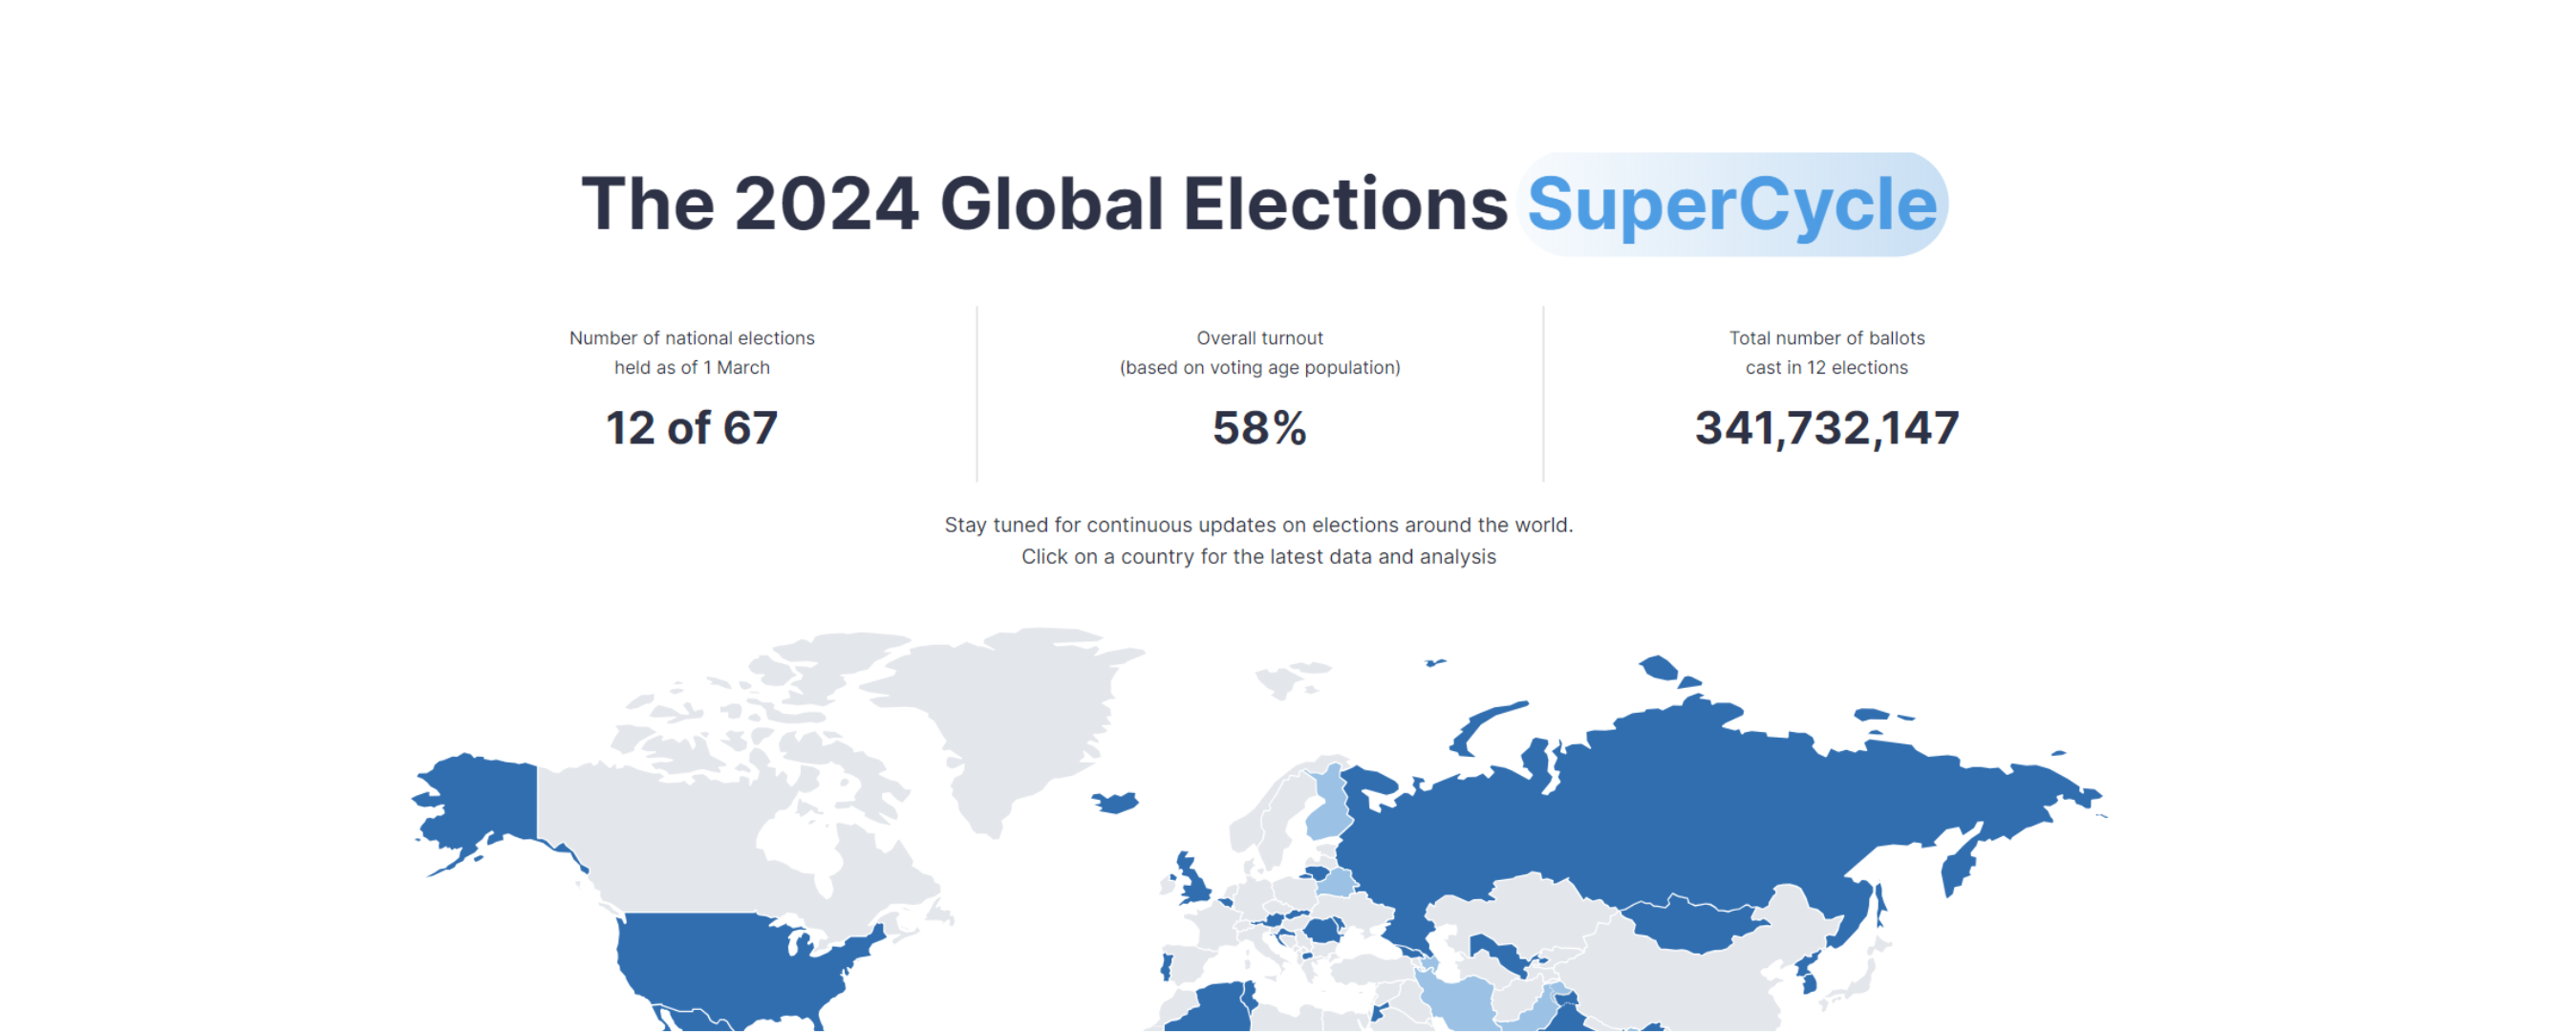 The 2024 Global Elections SuperCycle